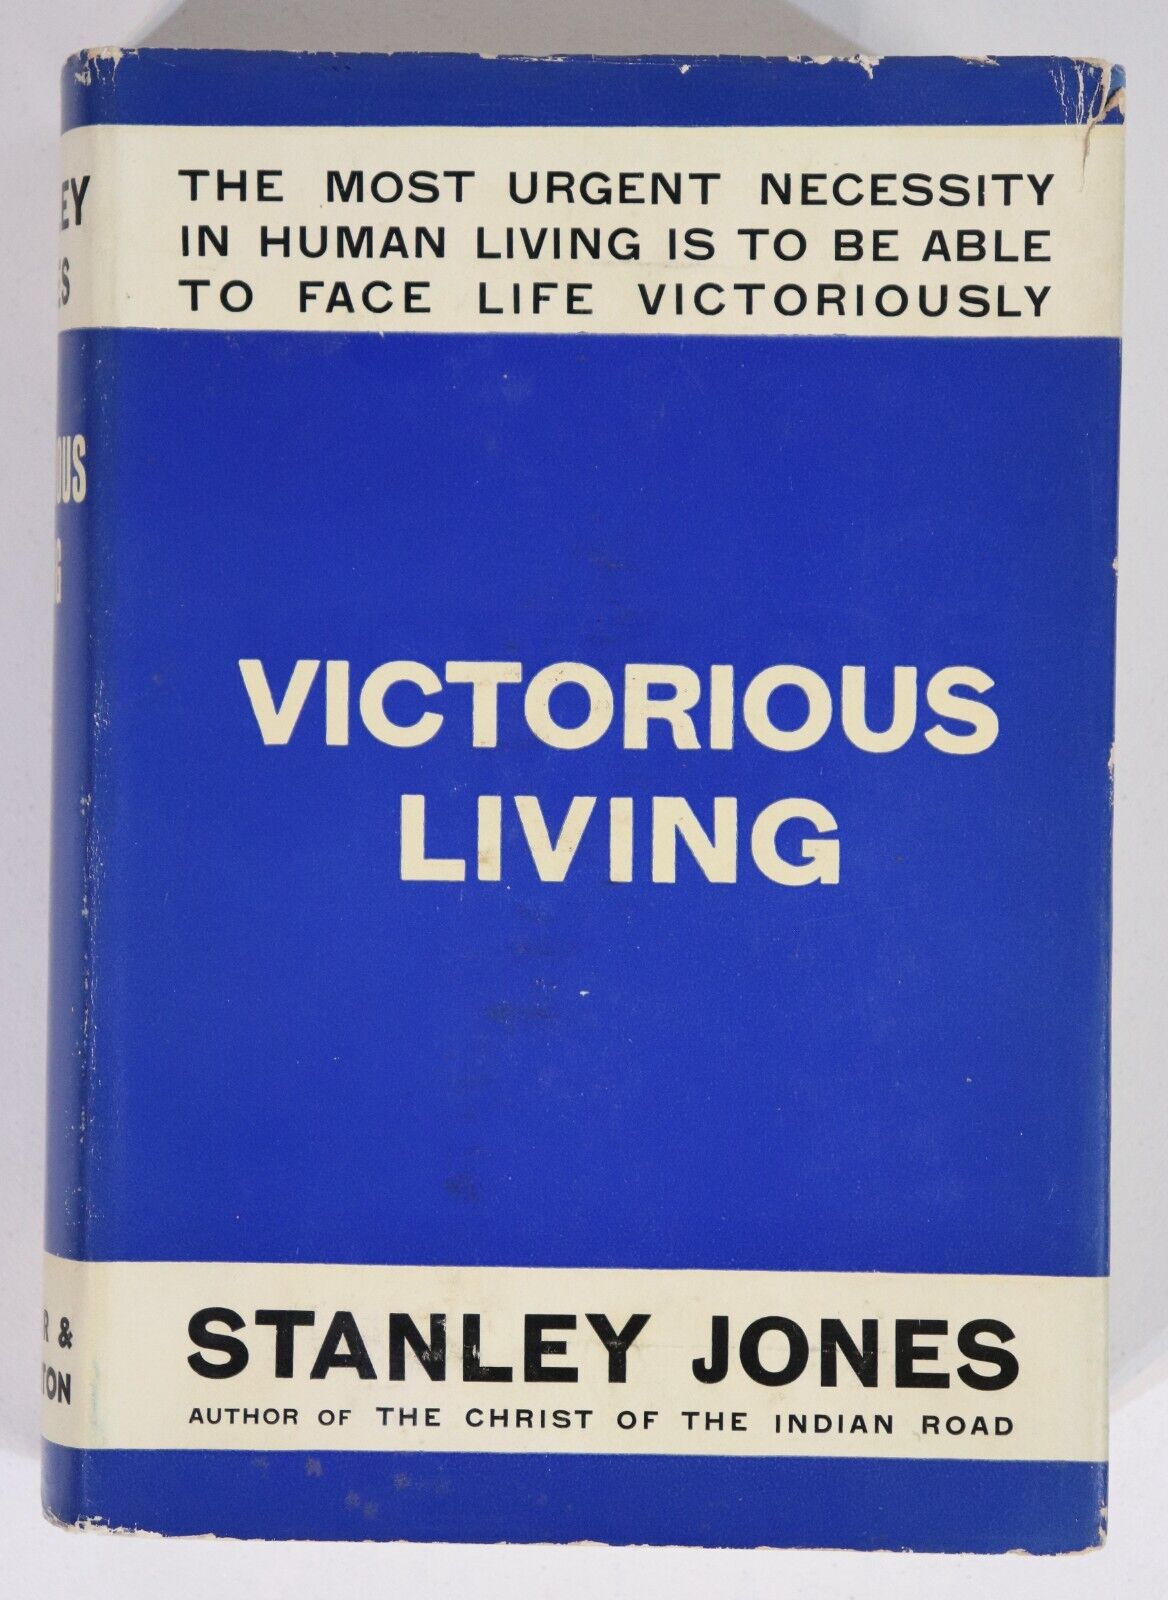 Victorious Living by E. Stanley Jones - 1939 - Antique Theology Book